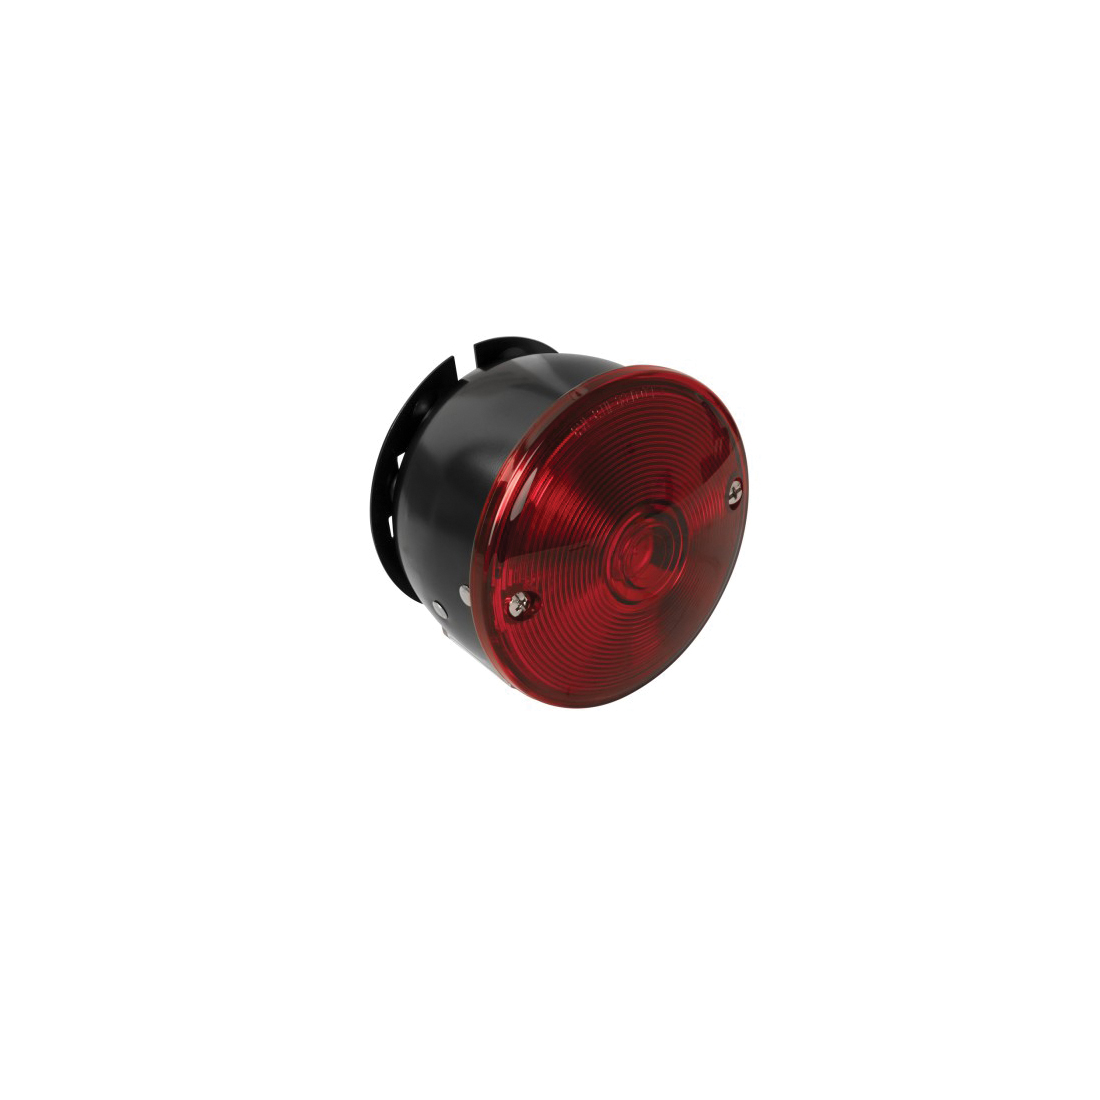 Blazer B55UW Tail Light with Metal Mounting Plate, Incandescent Lamp, Red Housing, Acrylic Lens - 5